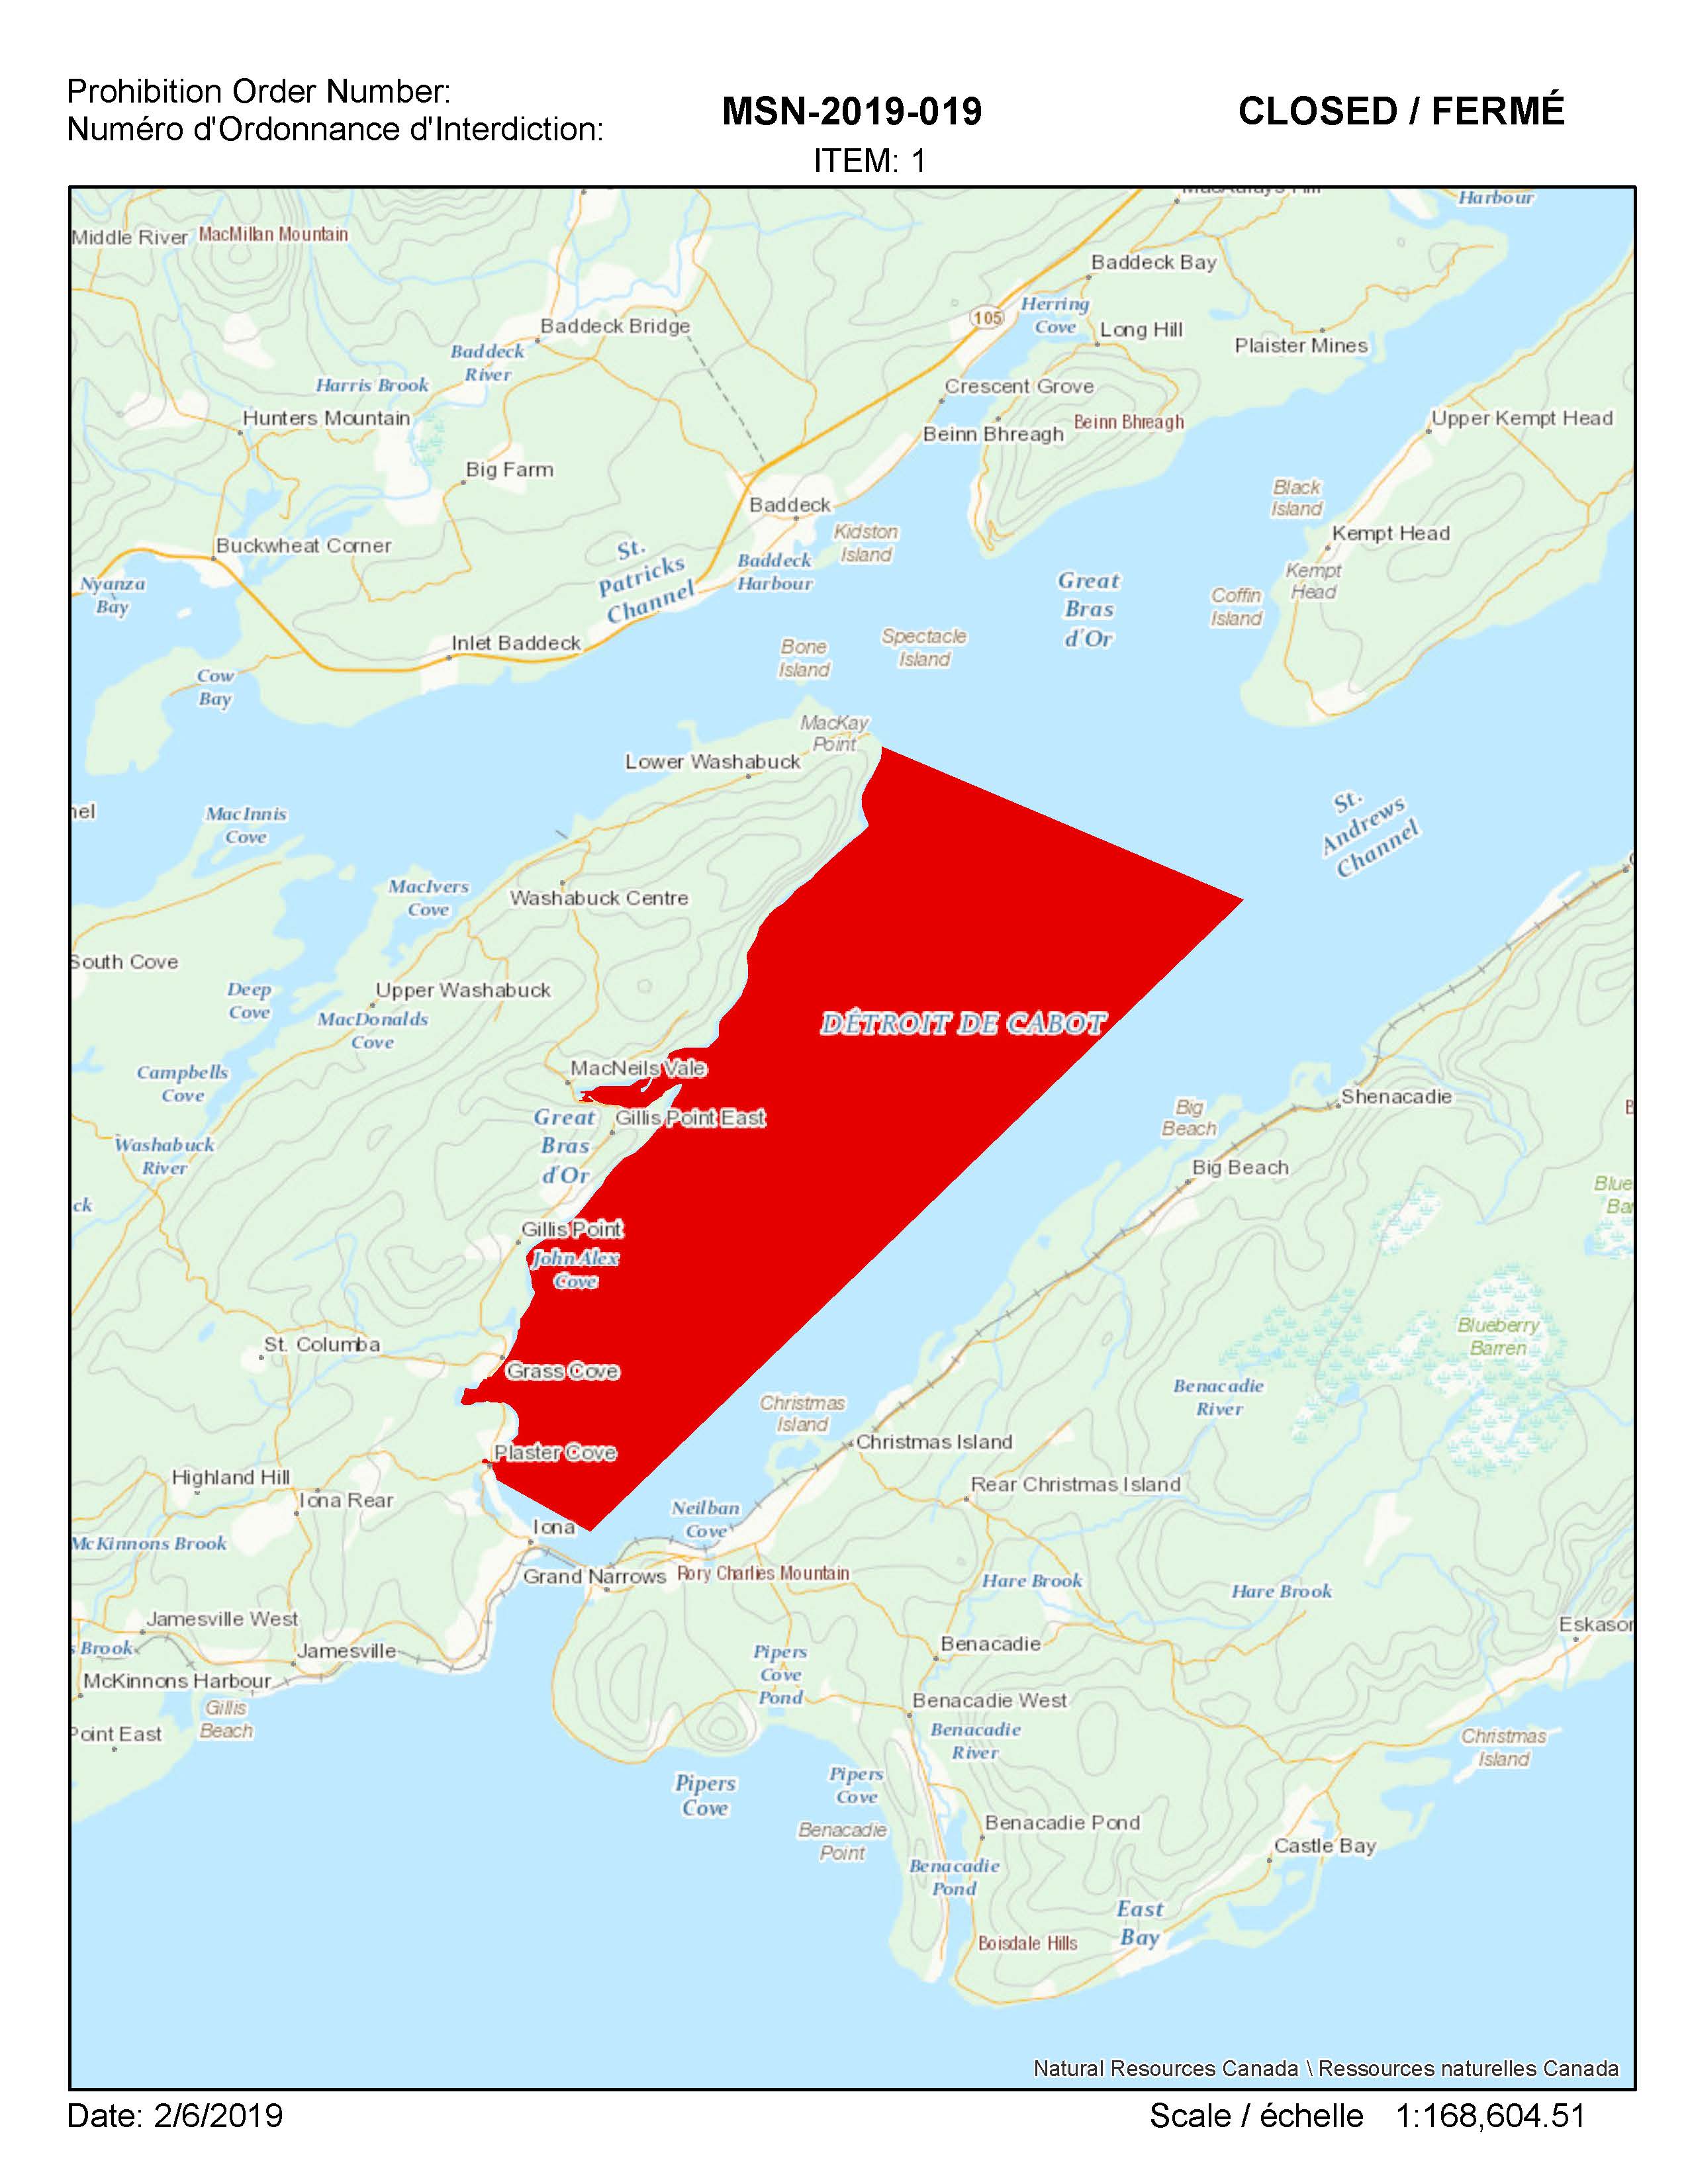 Map describing the affected areas as per the aformentioned notice.